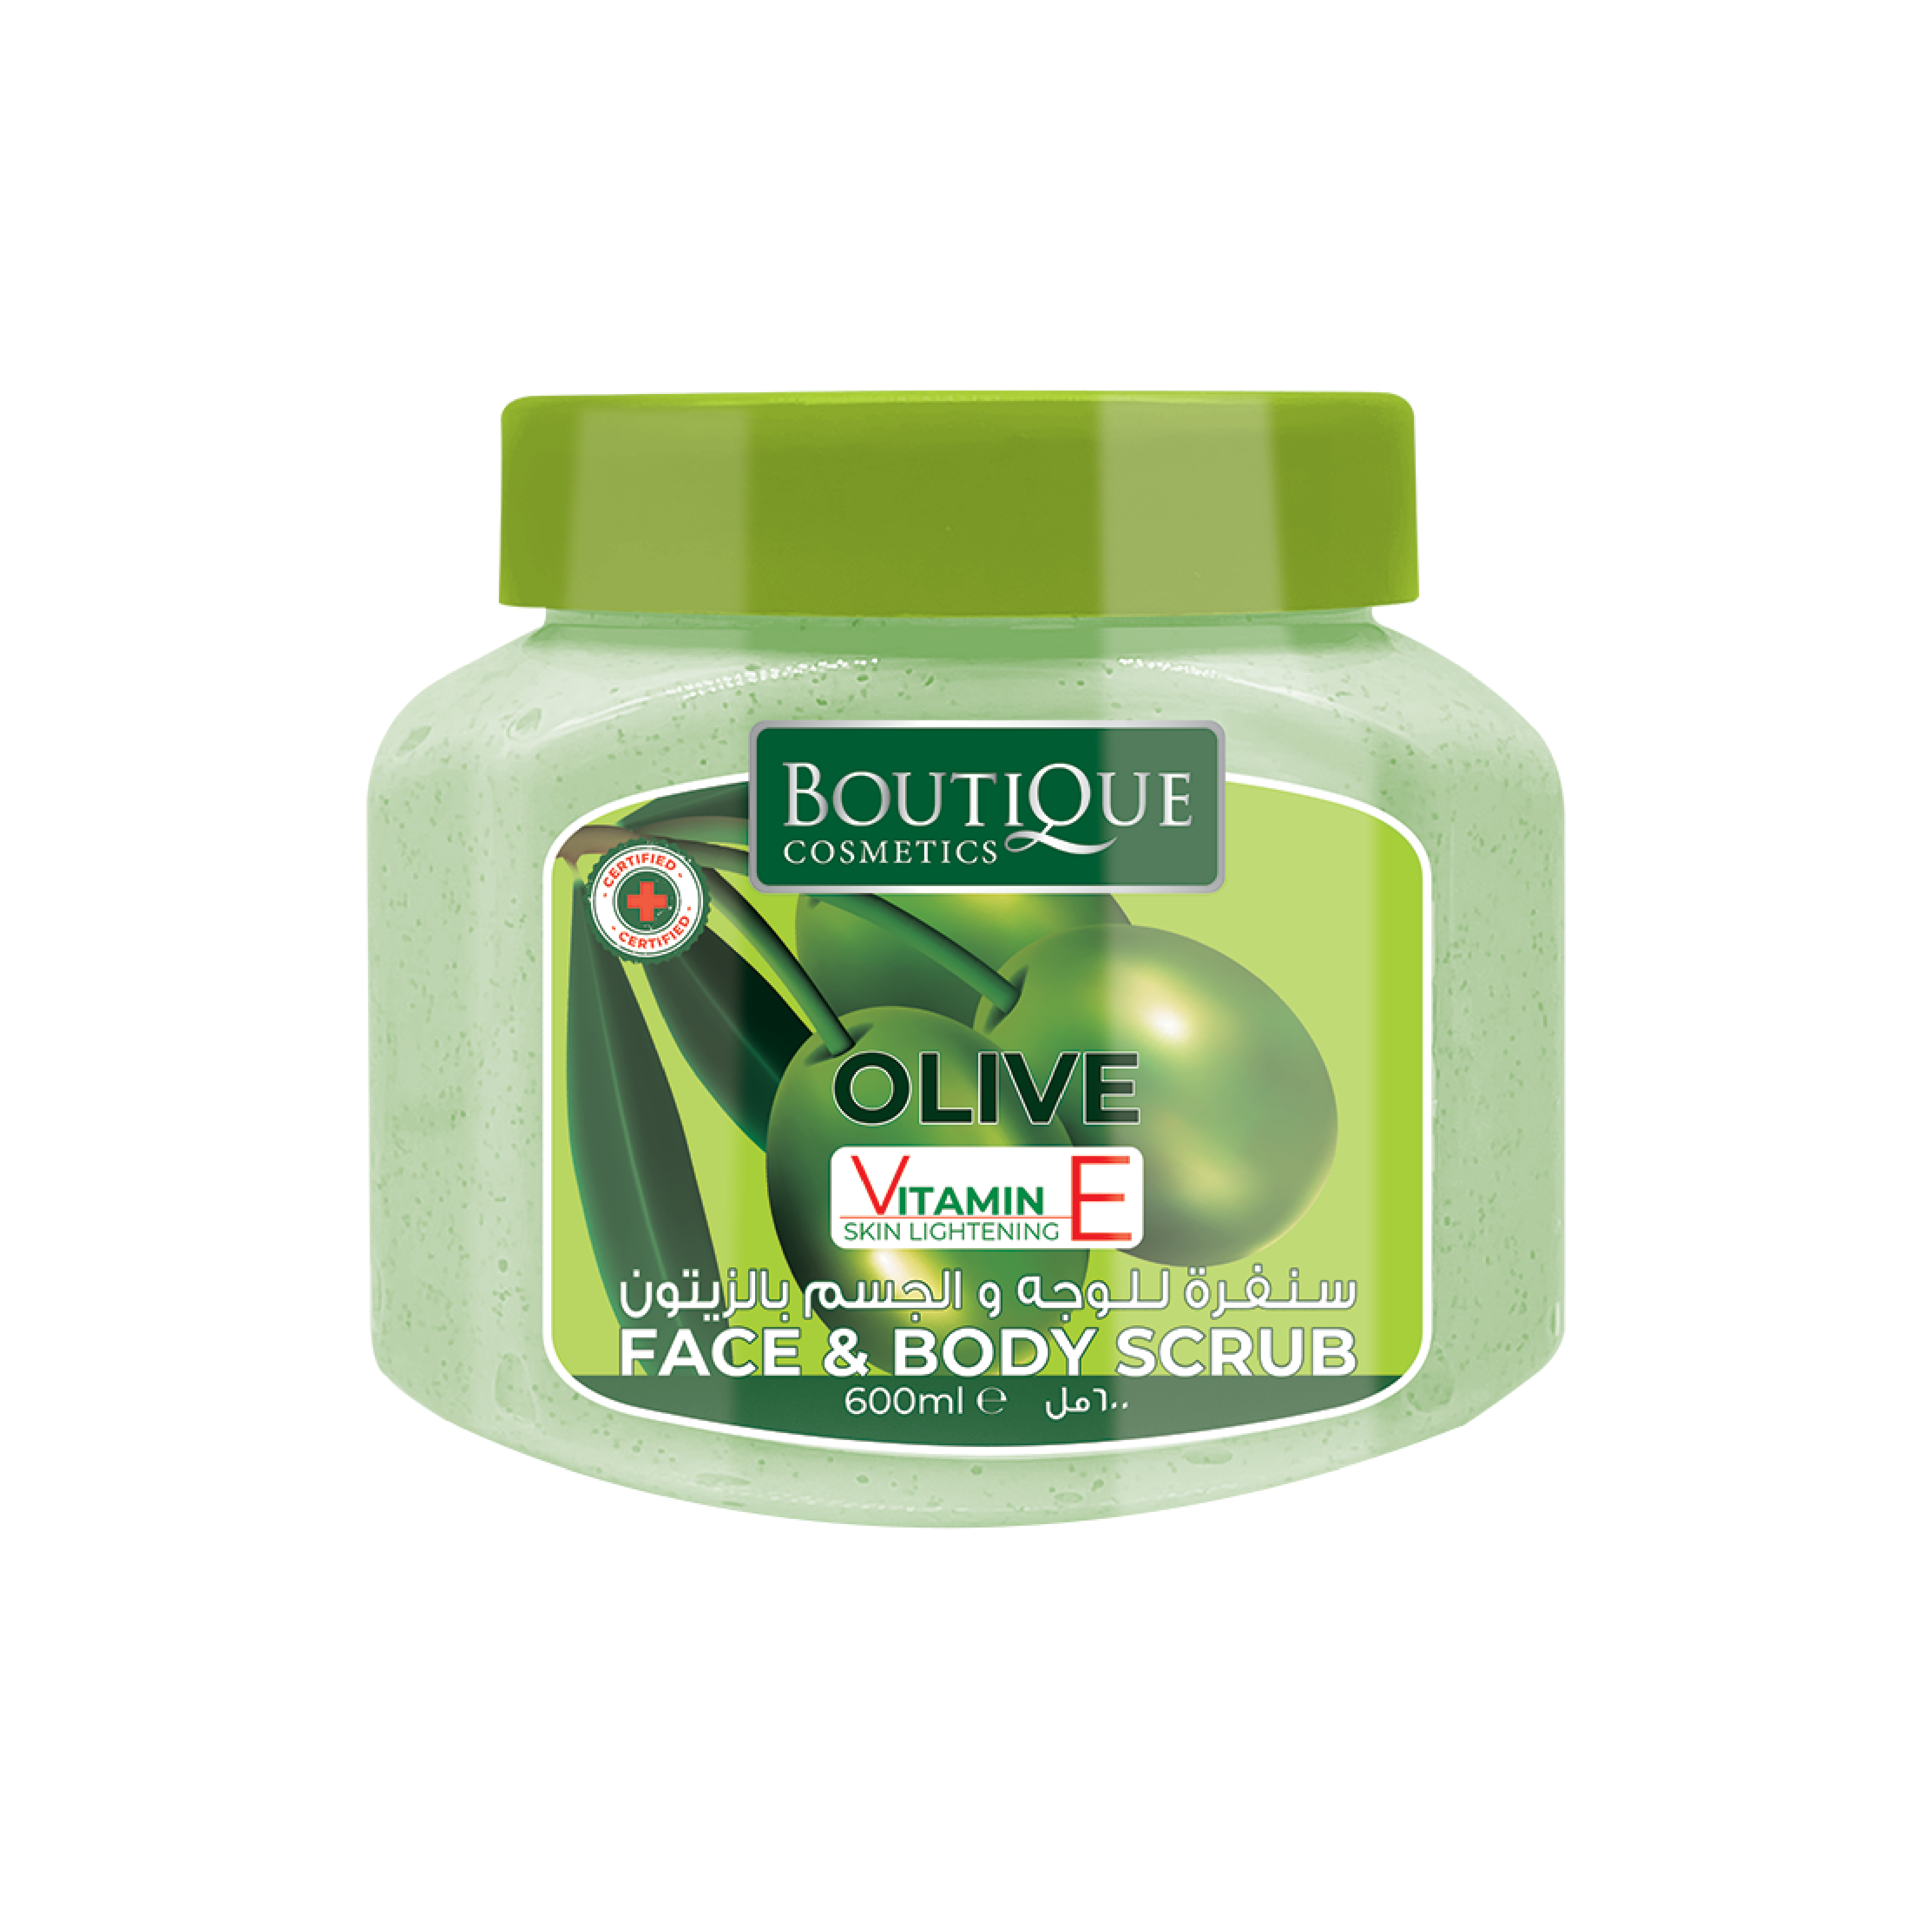 Nourish with BOUTIQUE - Face & Body Scrub Gel Olive